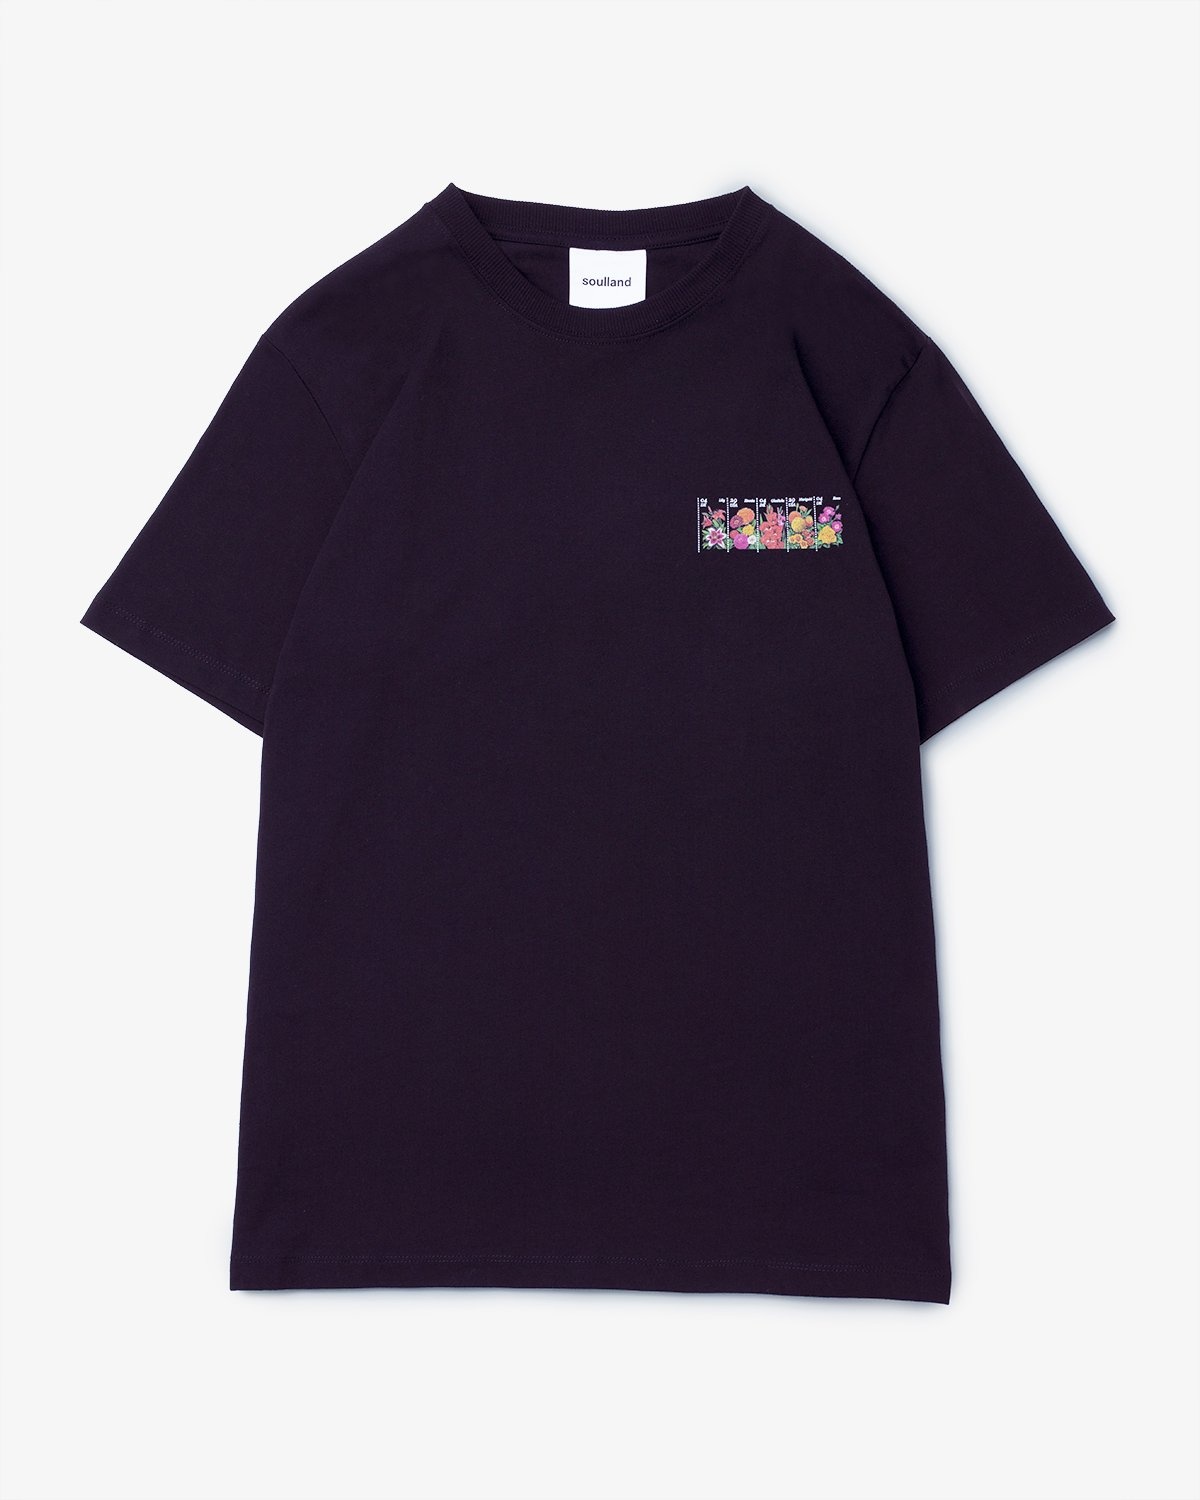 Soulland – Rossell S/S Black - T-Shirts - Black - Image 2